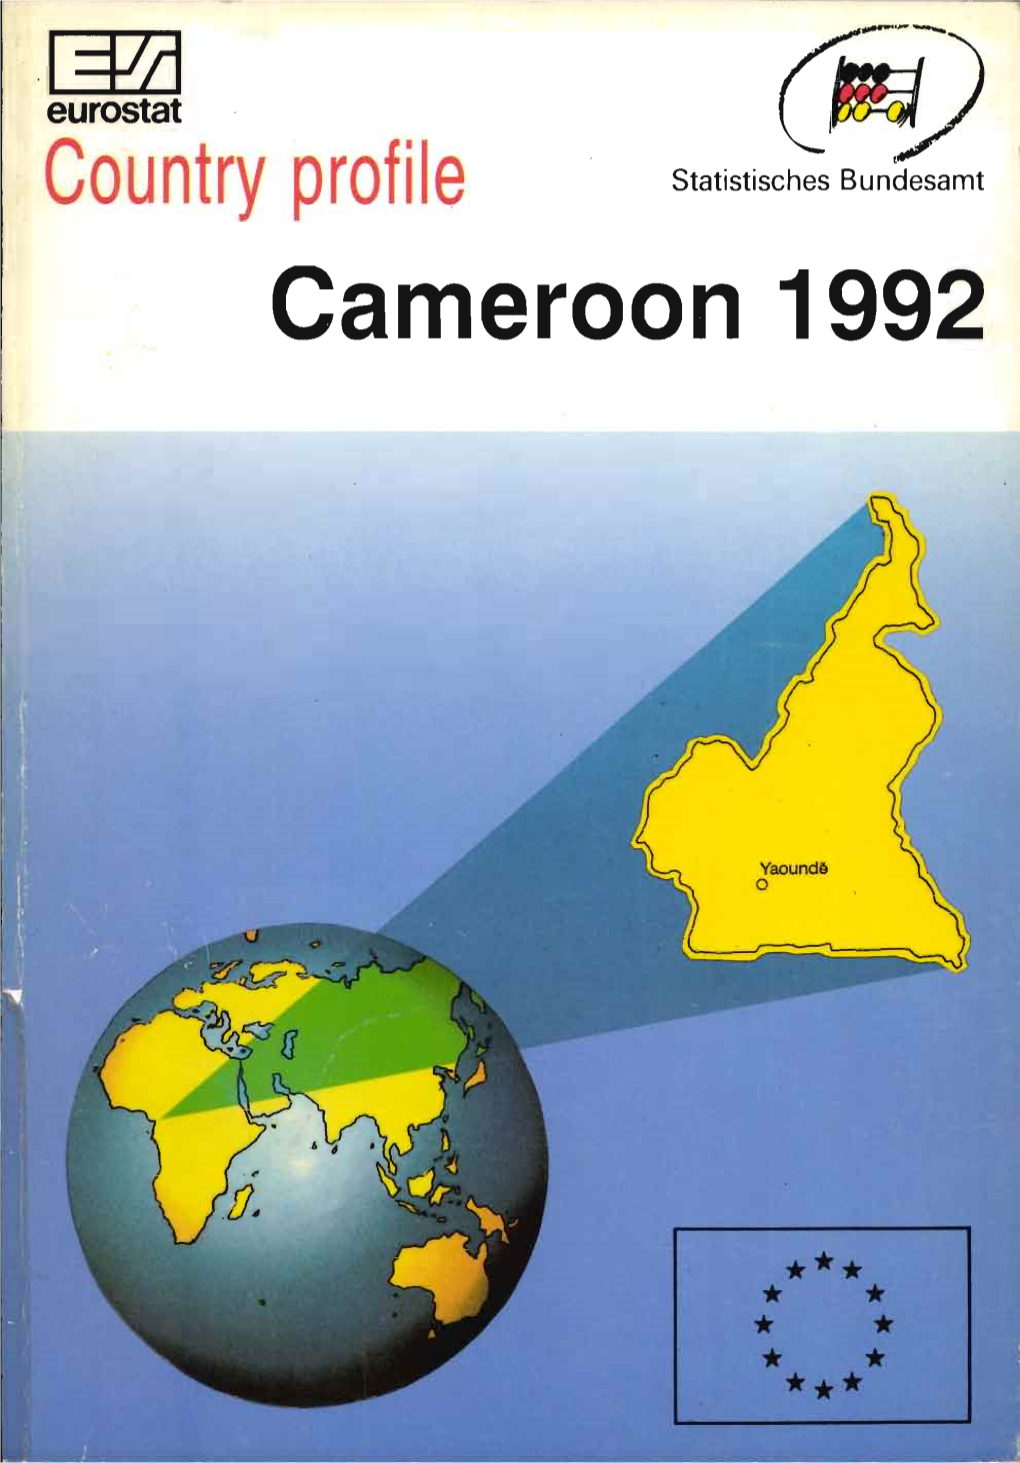 Cameroon 1992 Catalogulng Data Can Be Found at the End of This Publication